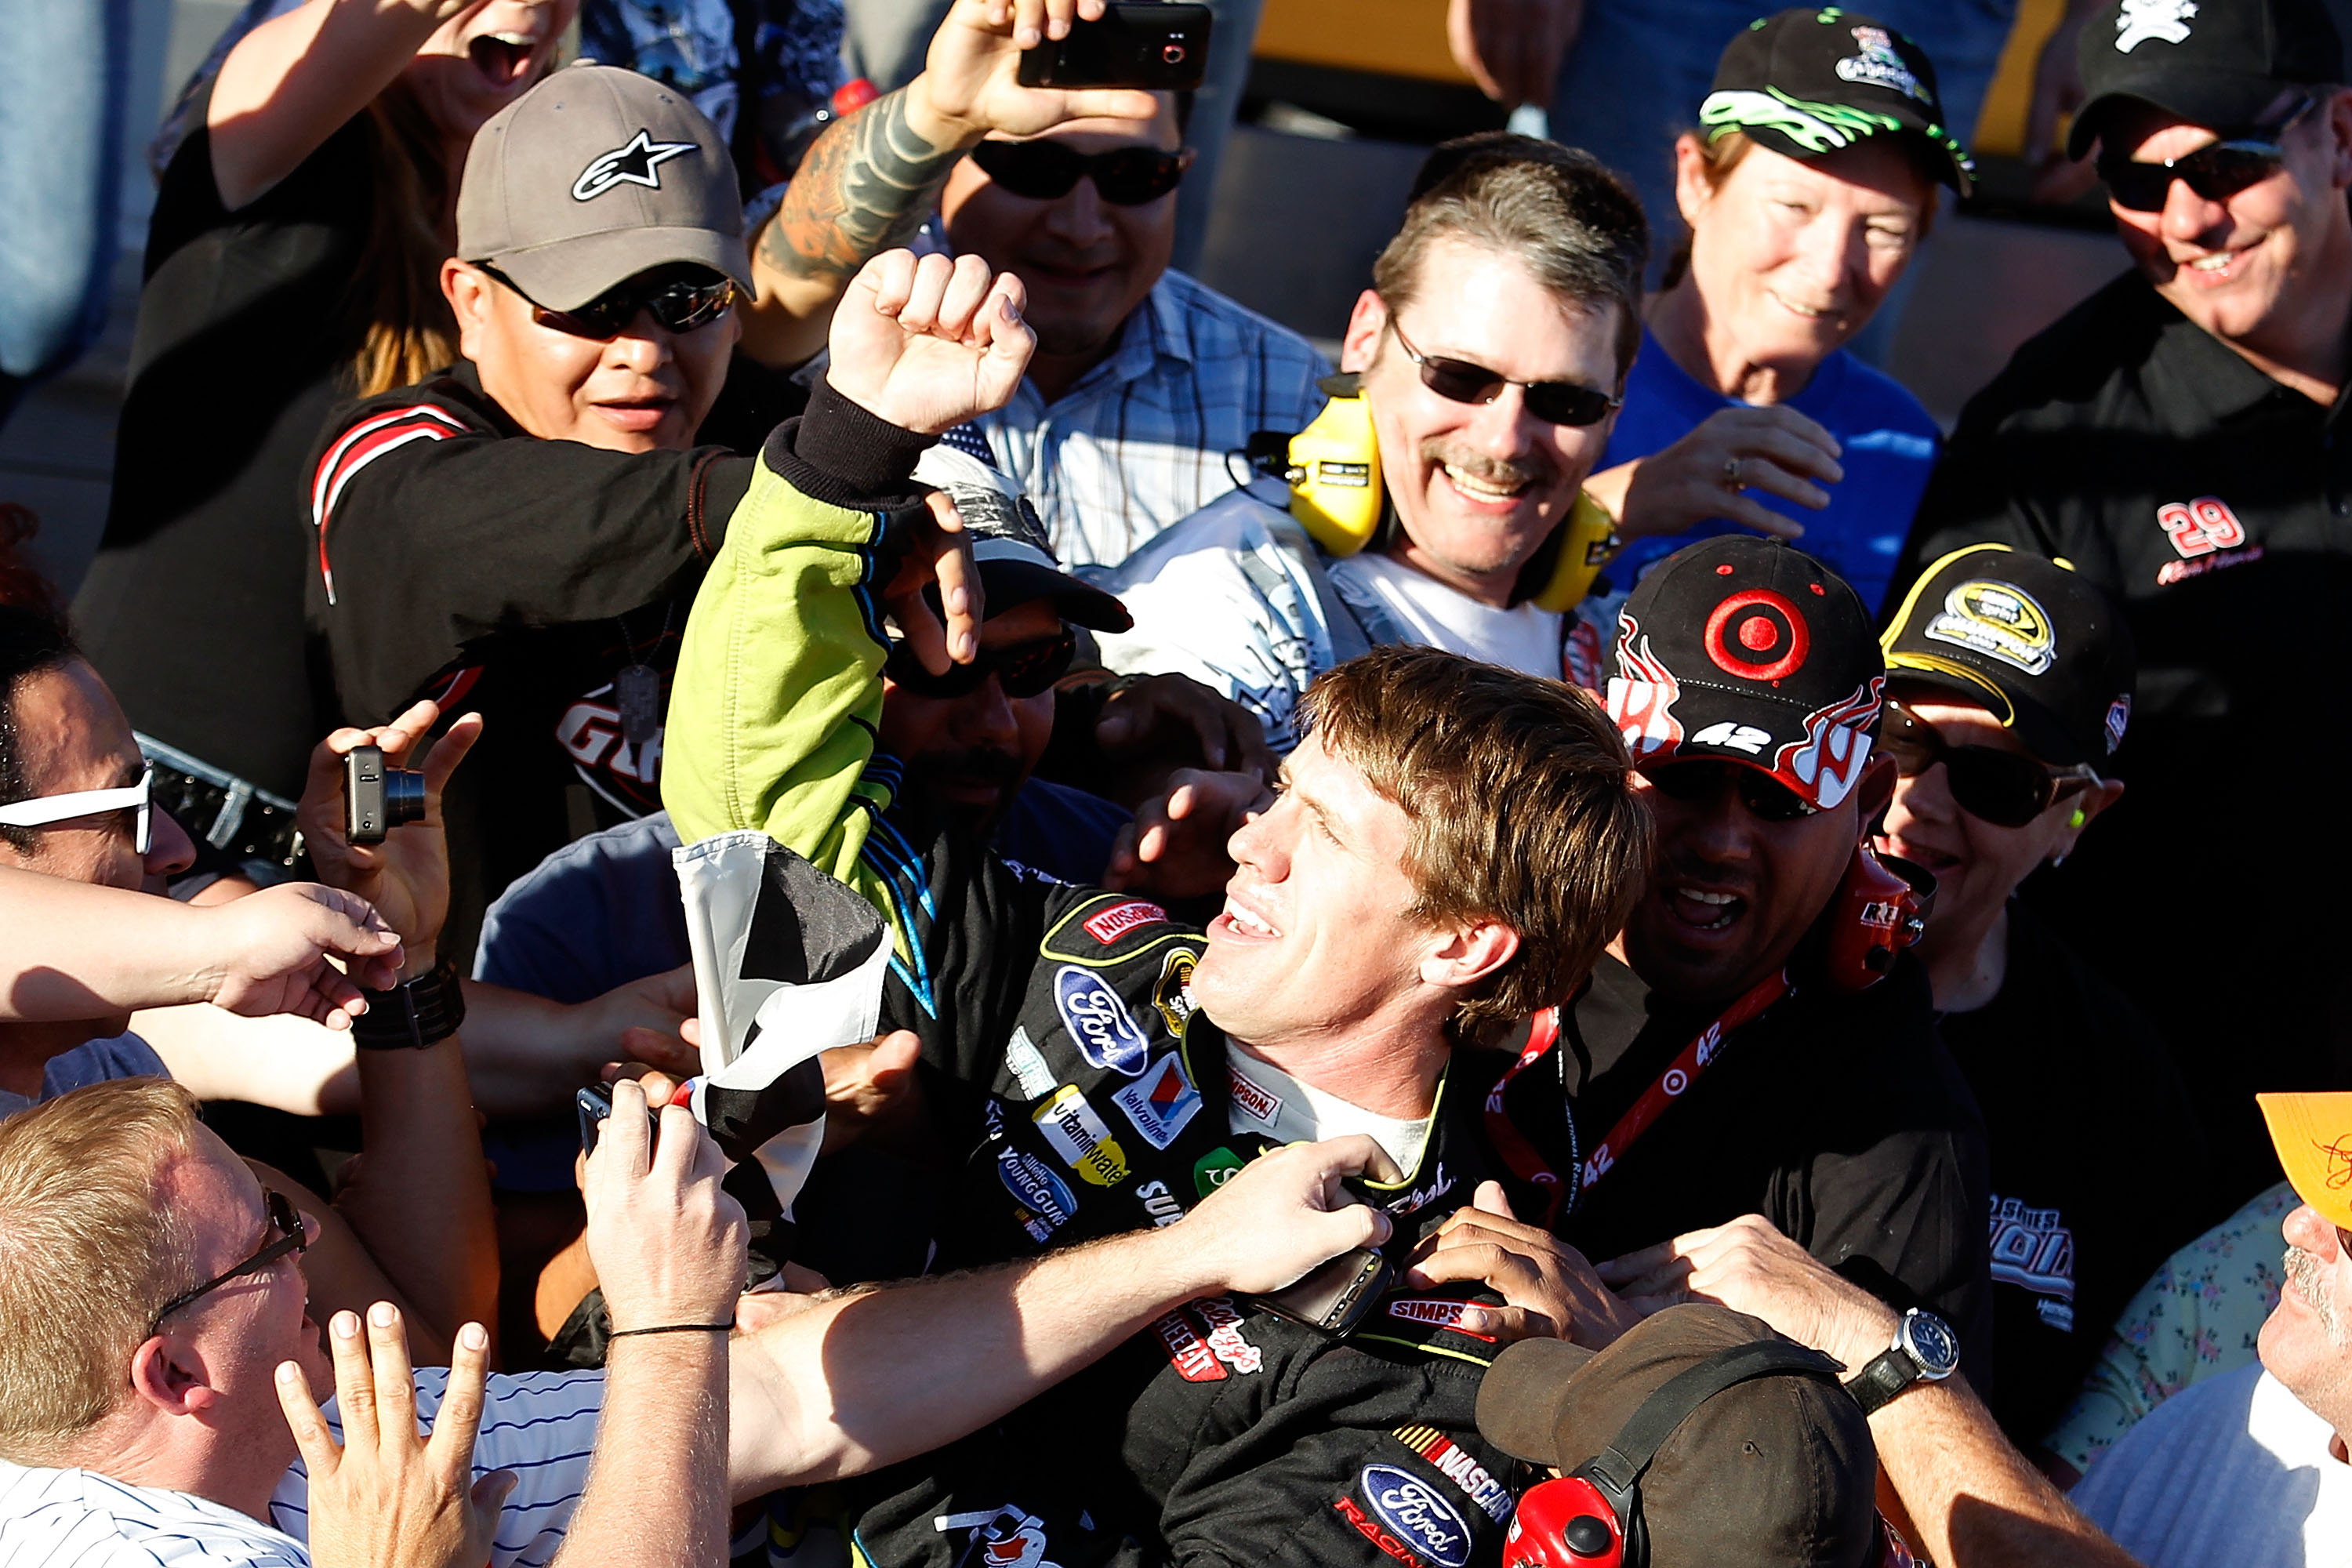 AVONDALE, AZ - NOVEMBER 14:  Carl Edwards, driver of the #99 Aflac Ford, celebrates in the stands with fans after winning the NASCAR Sprint Cup Series Kobalt Tools 500 at Phoenix International Raceway on November 14, 2010 in Avondale, Arizona.  (Photo by